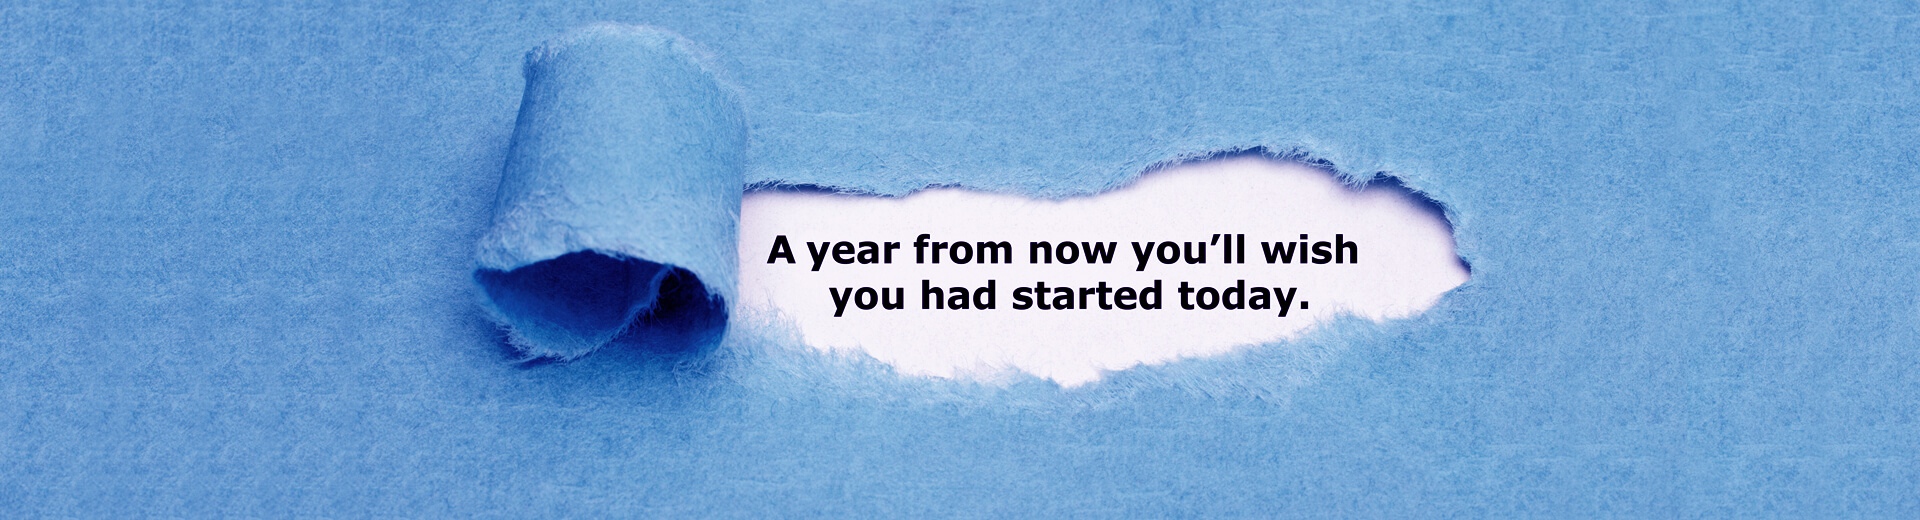 A year from now you'll wish you had started today.